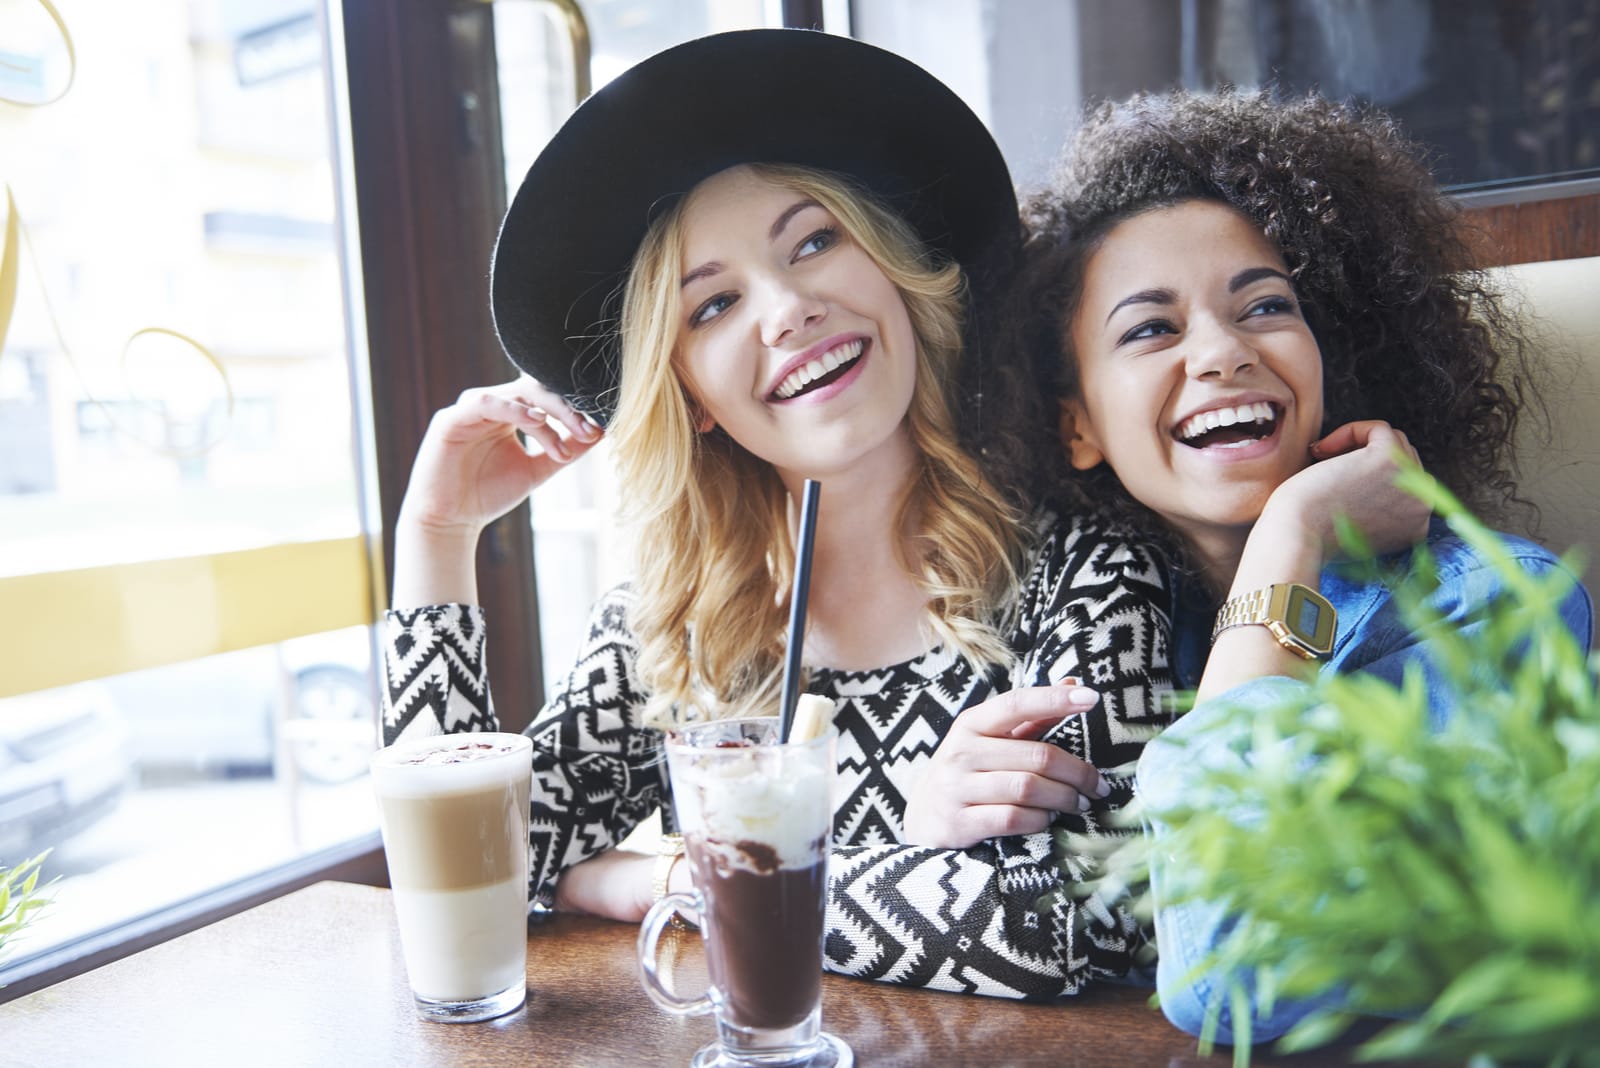 Companions Bucket List: 13 Challenges You Have To Do With Your Best Friend